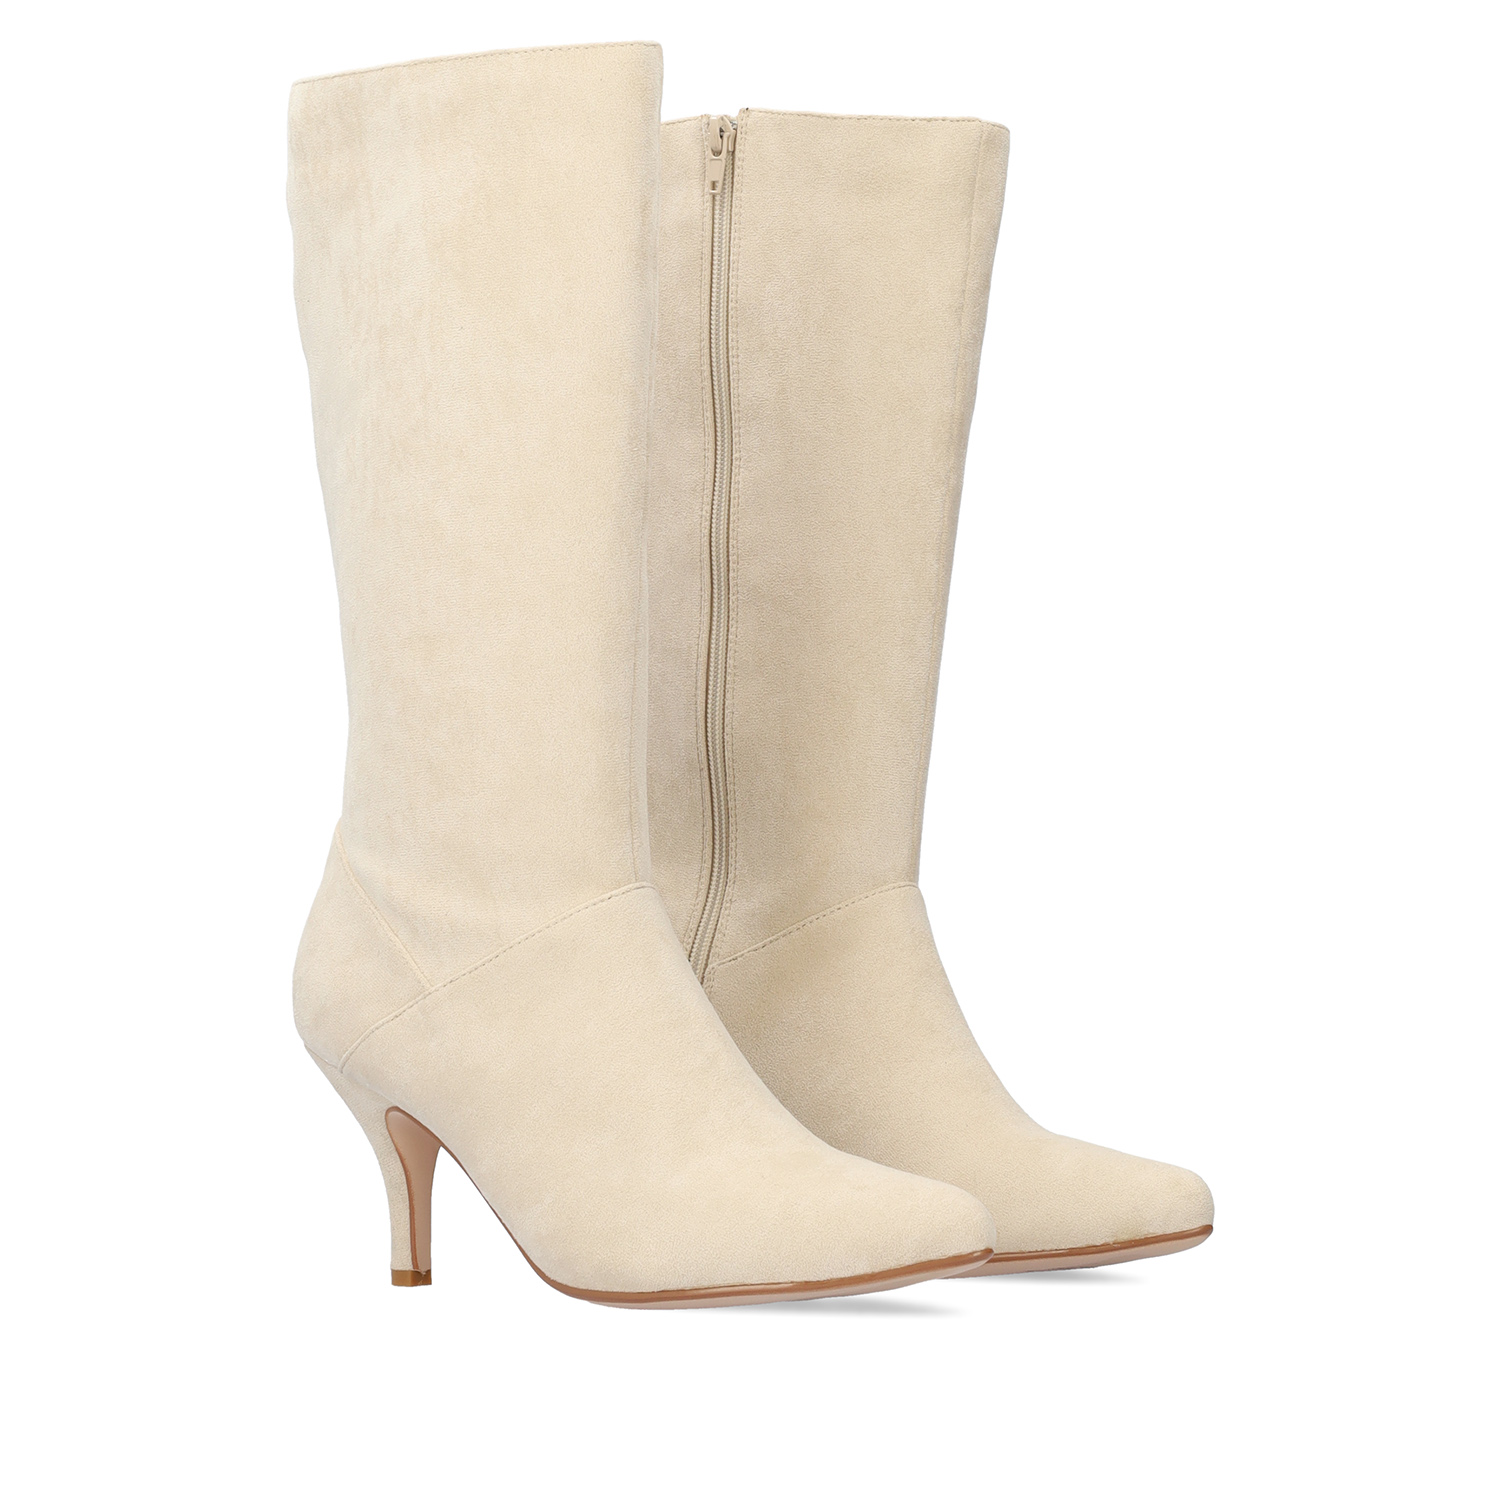 Heeled high boots in off white faux suede. 